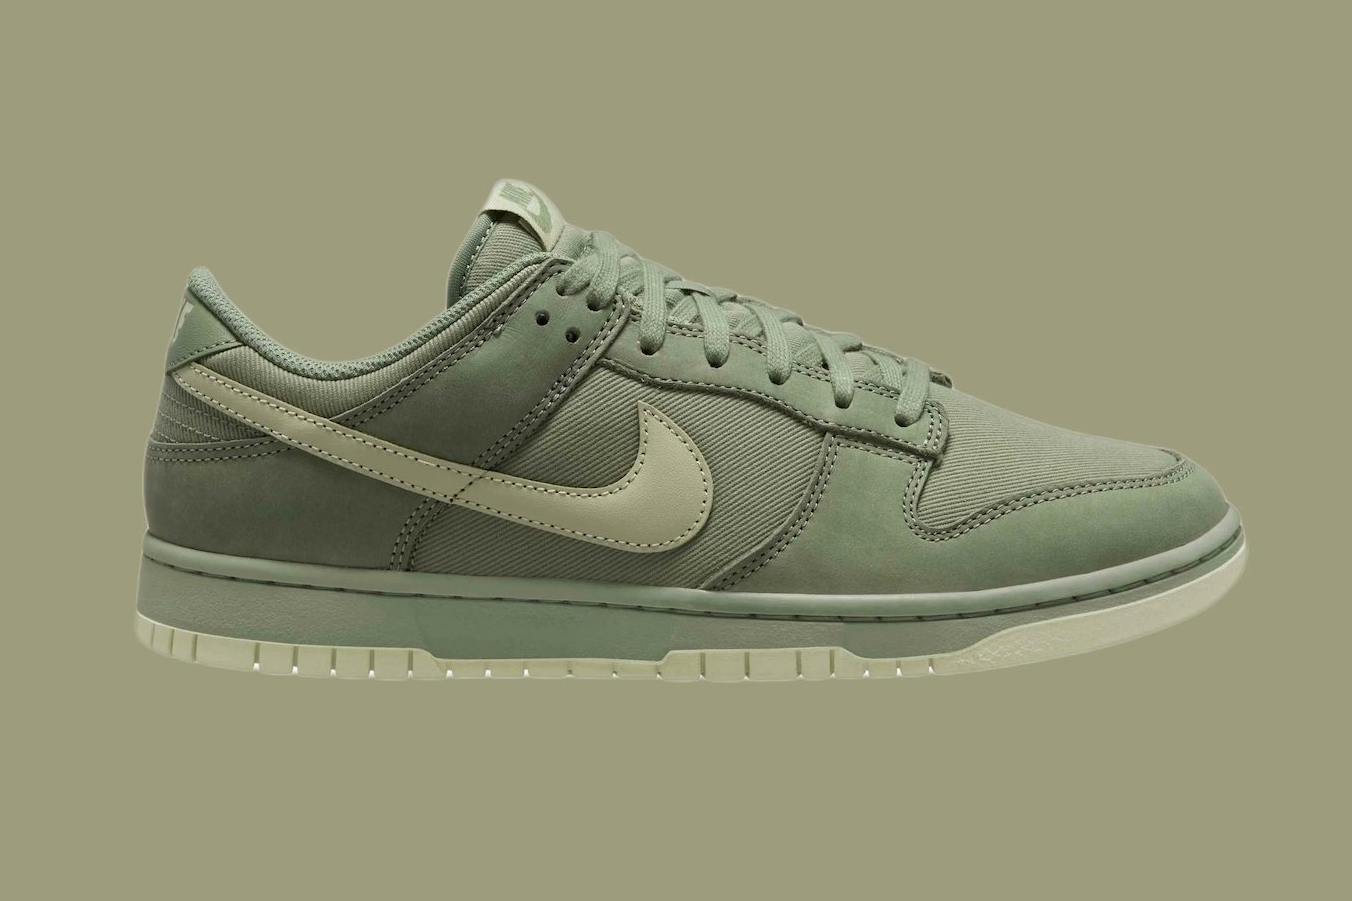 Where To Buy The Nike Dunk Low Premium “Oil Green”